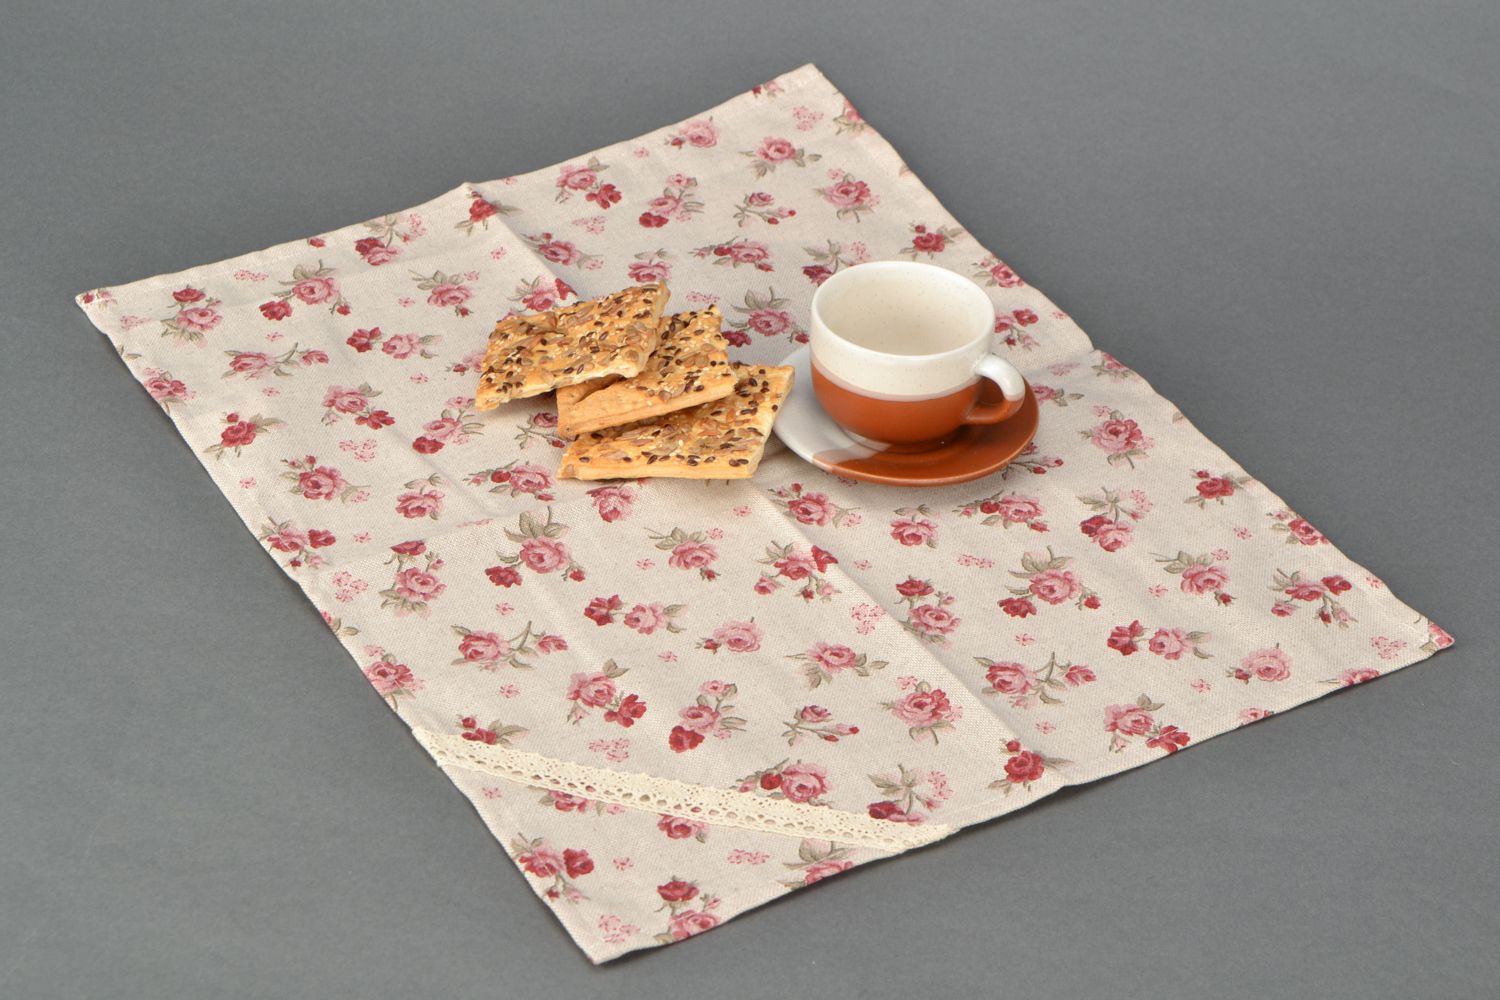 Decorative napkin made of cotton and polyamide fabric with floral print and lace photo 1